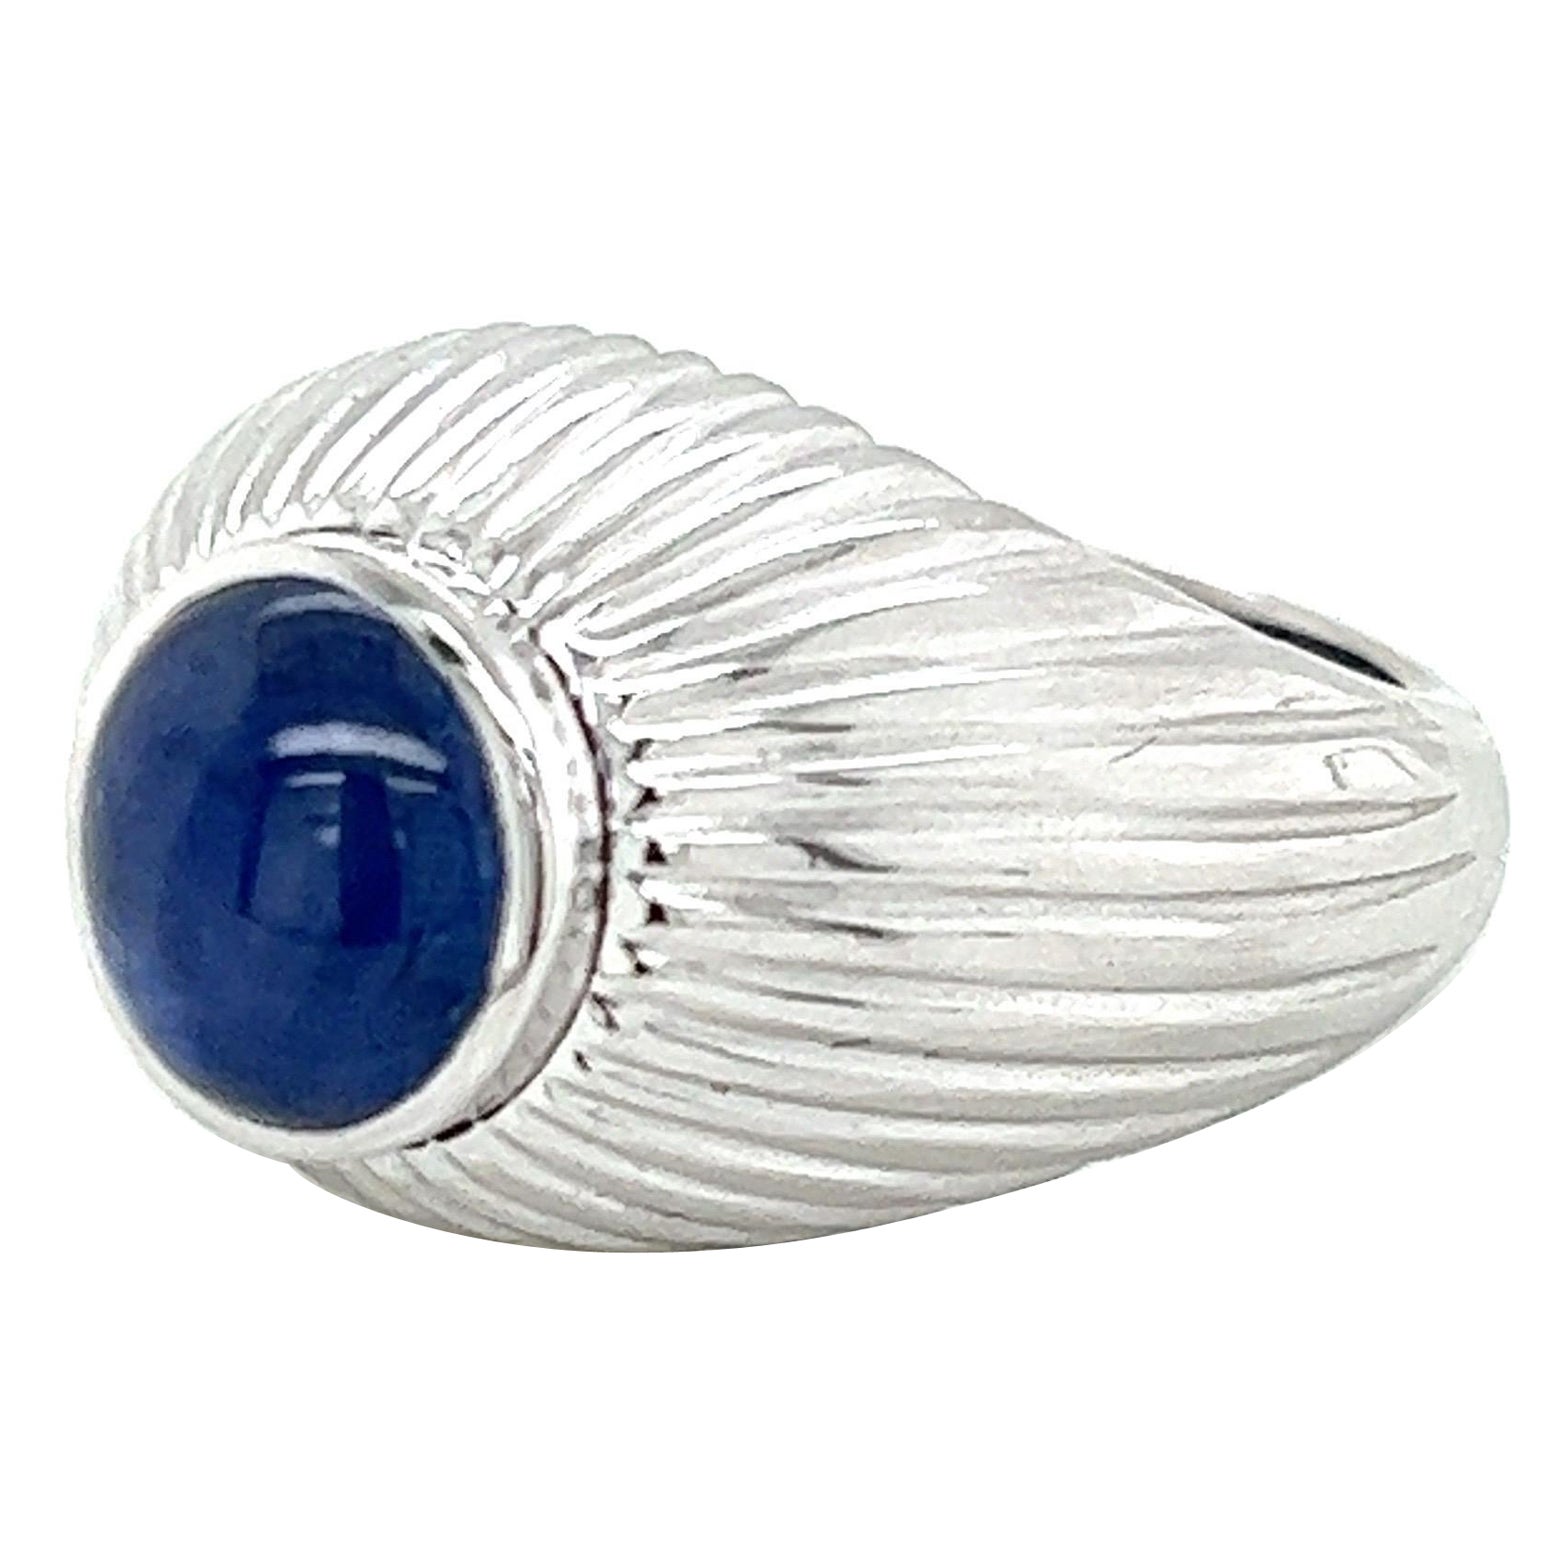 18k White Gold and Approx. 3.5ct Cabochon Sapphire Gents Ring